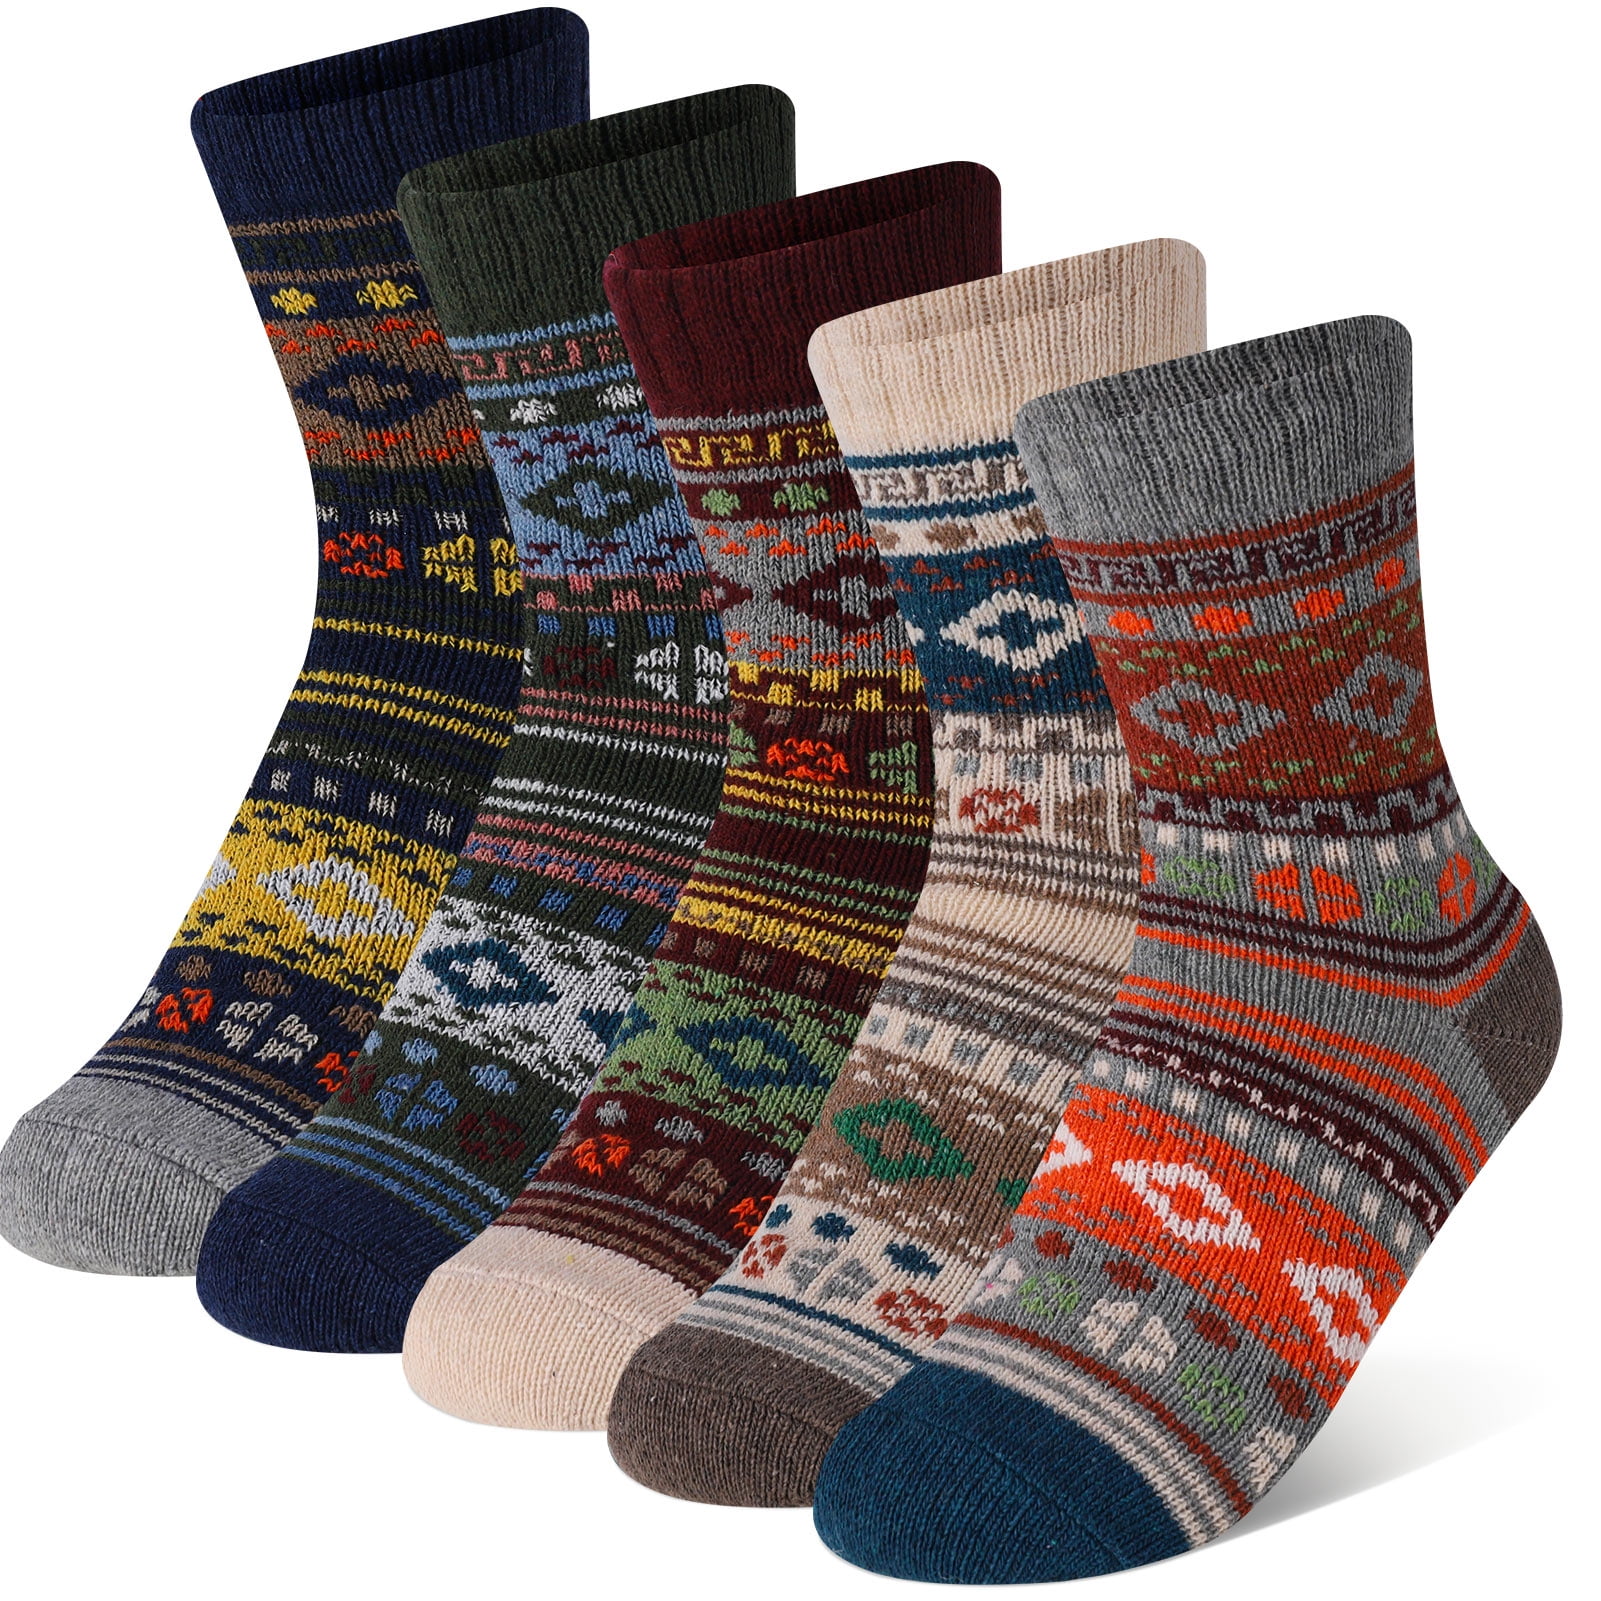 HEQUSIGNS 5 Pairs Mens Stripe Wool Socks, Thick Knitted Socks Winter ...